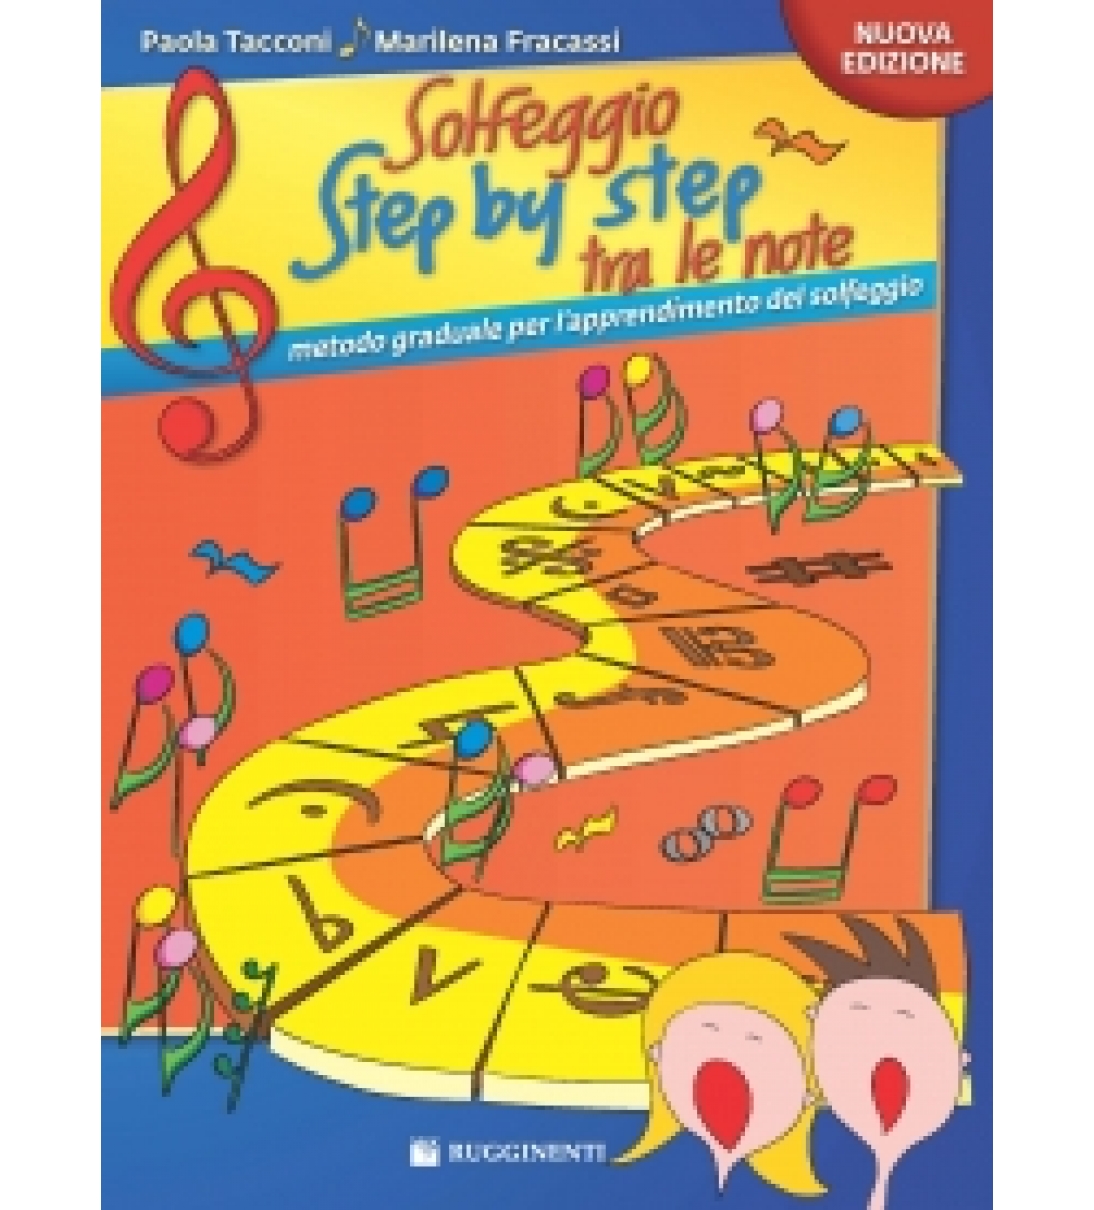 Solfeggio - Step by Step tra le Note